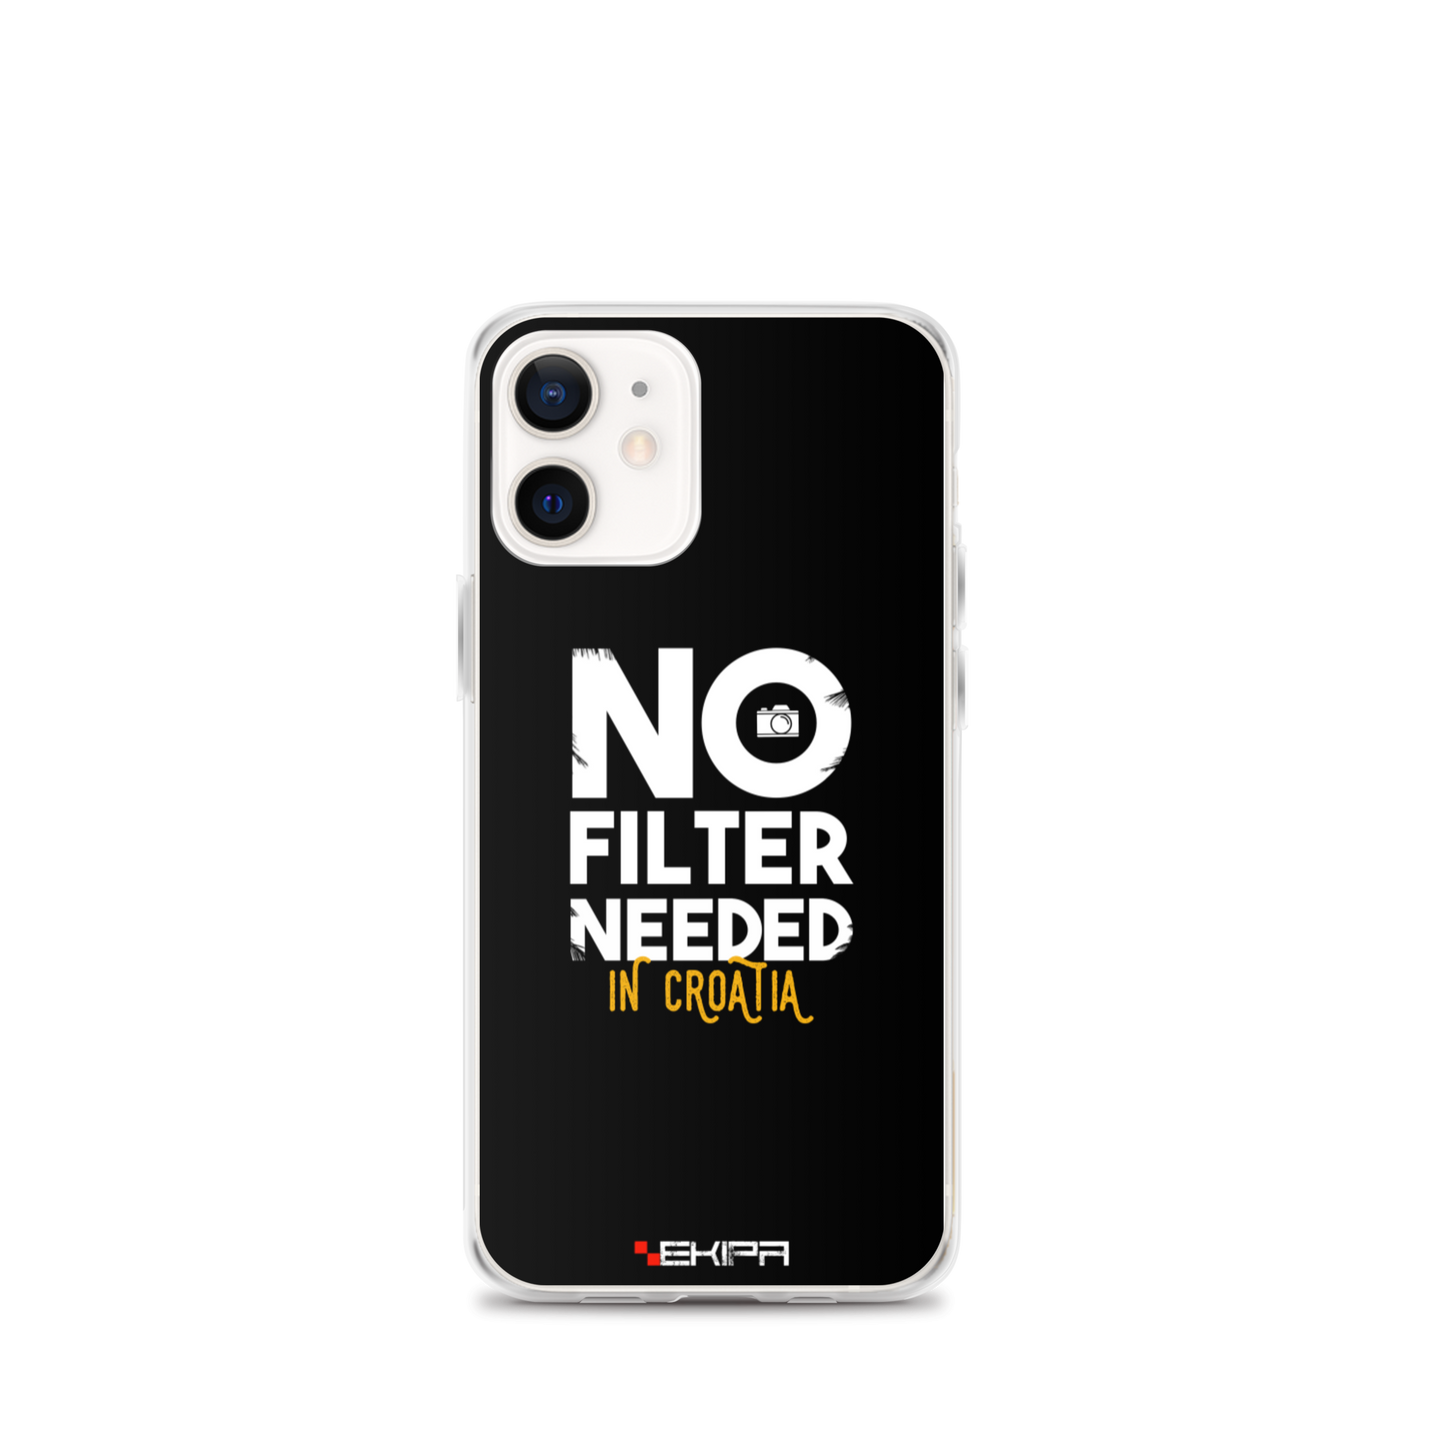 "No Filter Needed" - iPhone case